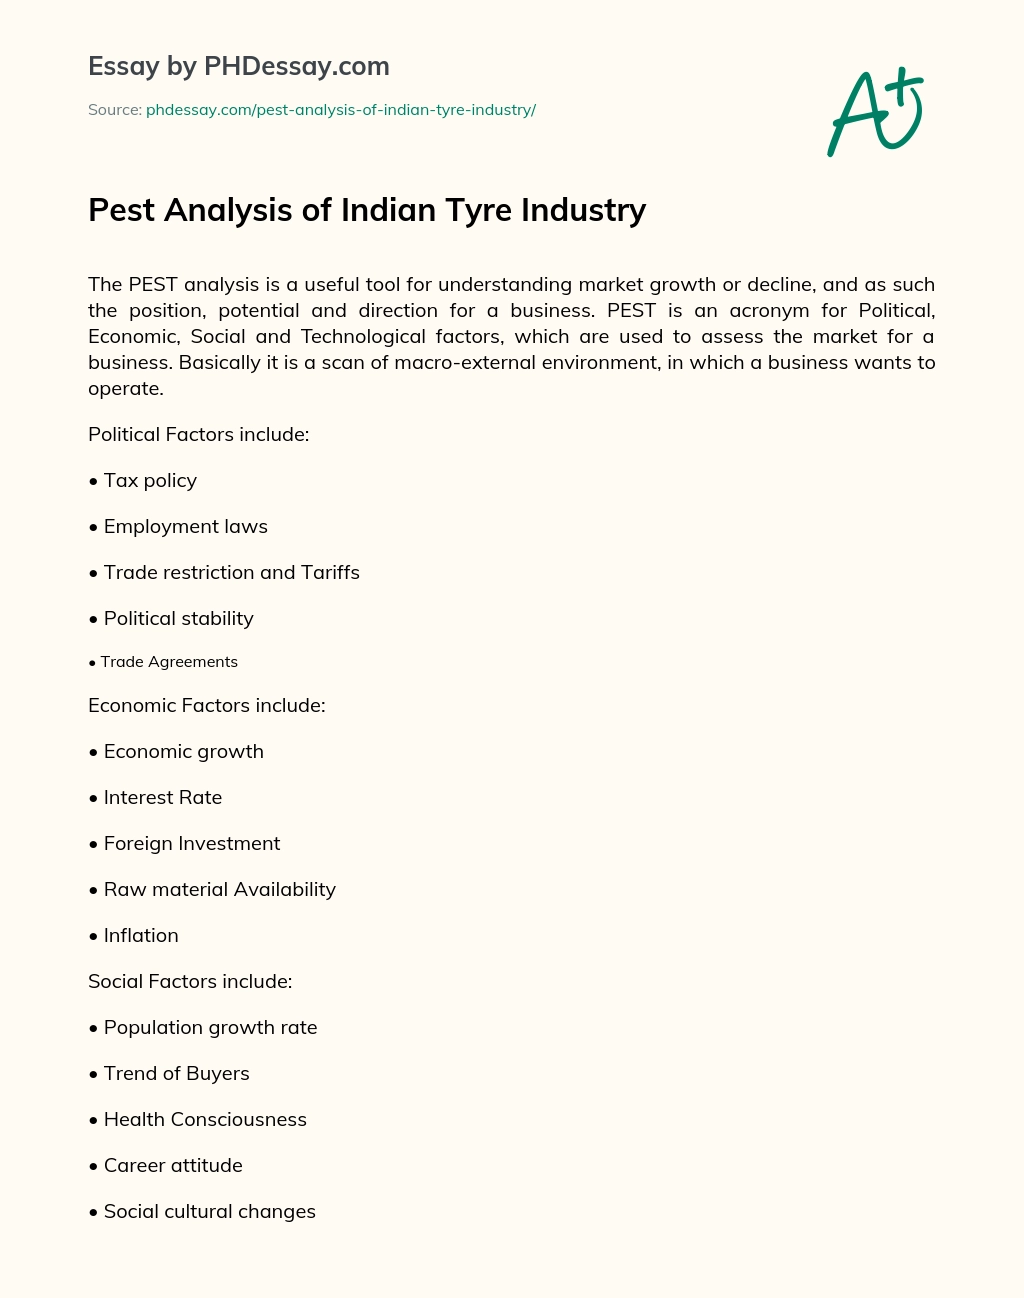 Pest Analysis of Indian Tyre Industry essay